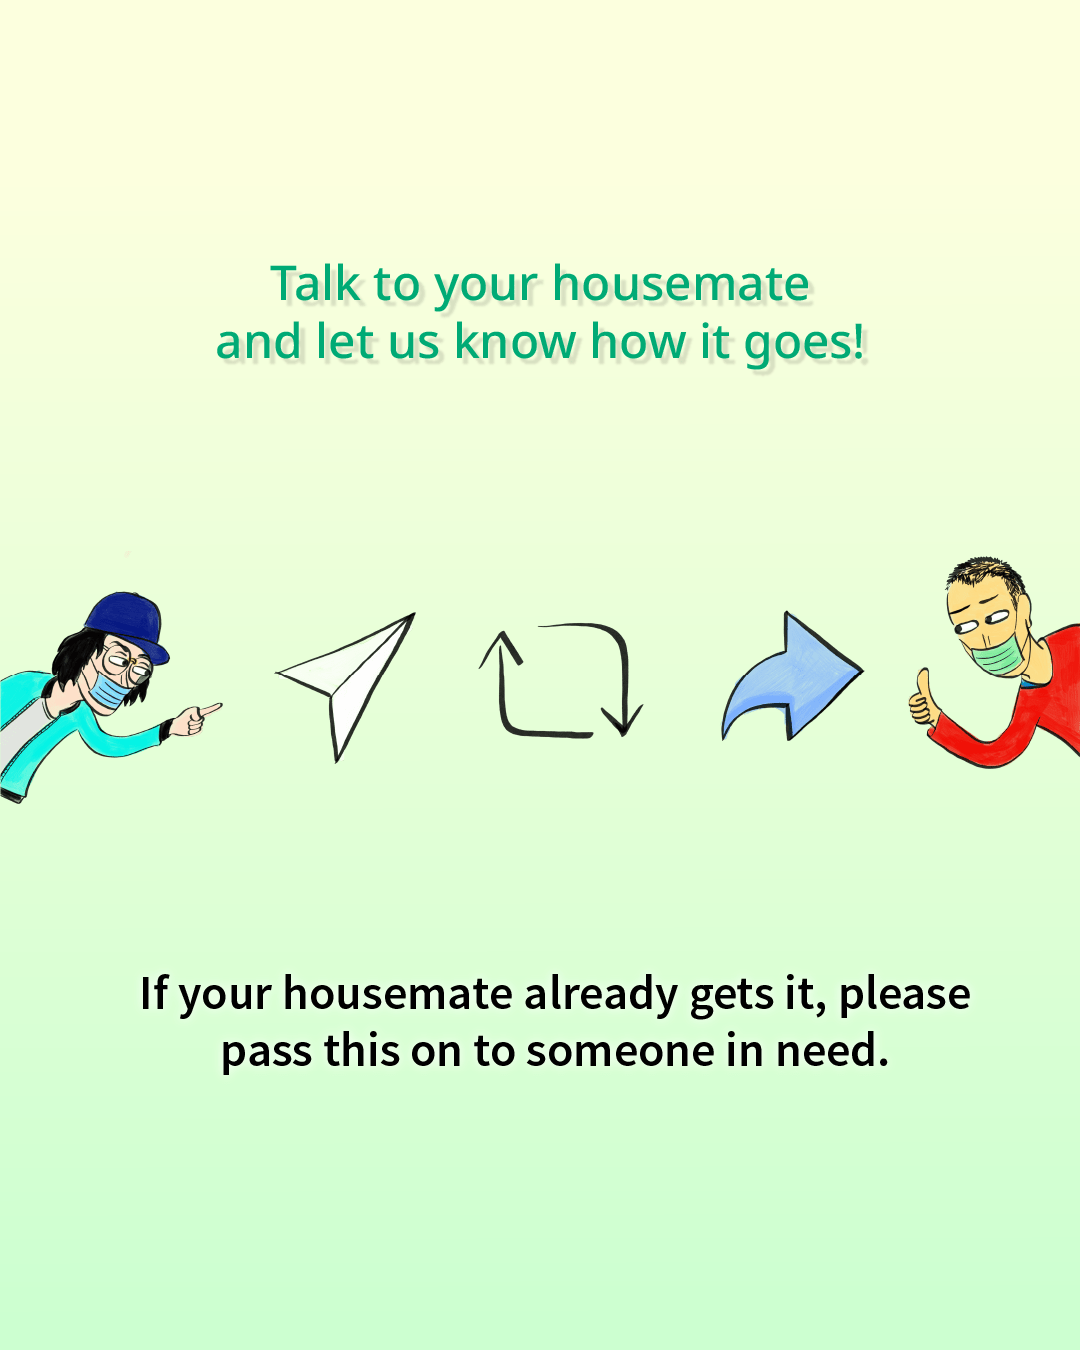 Housemate guide image 10/10